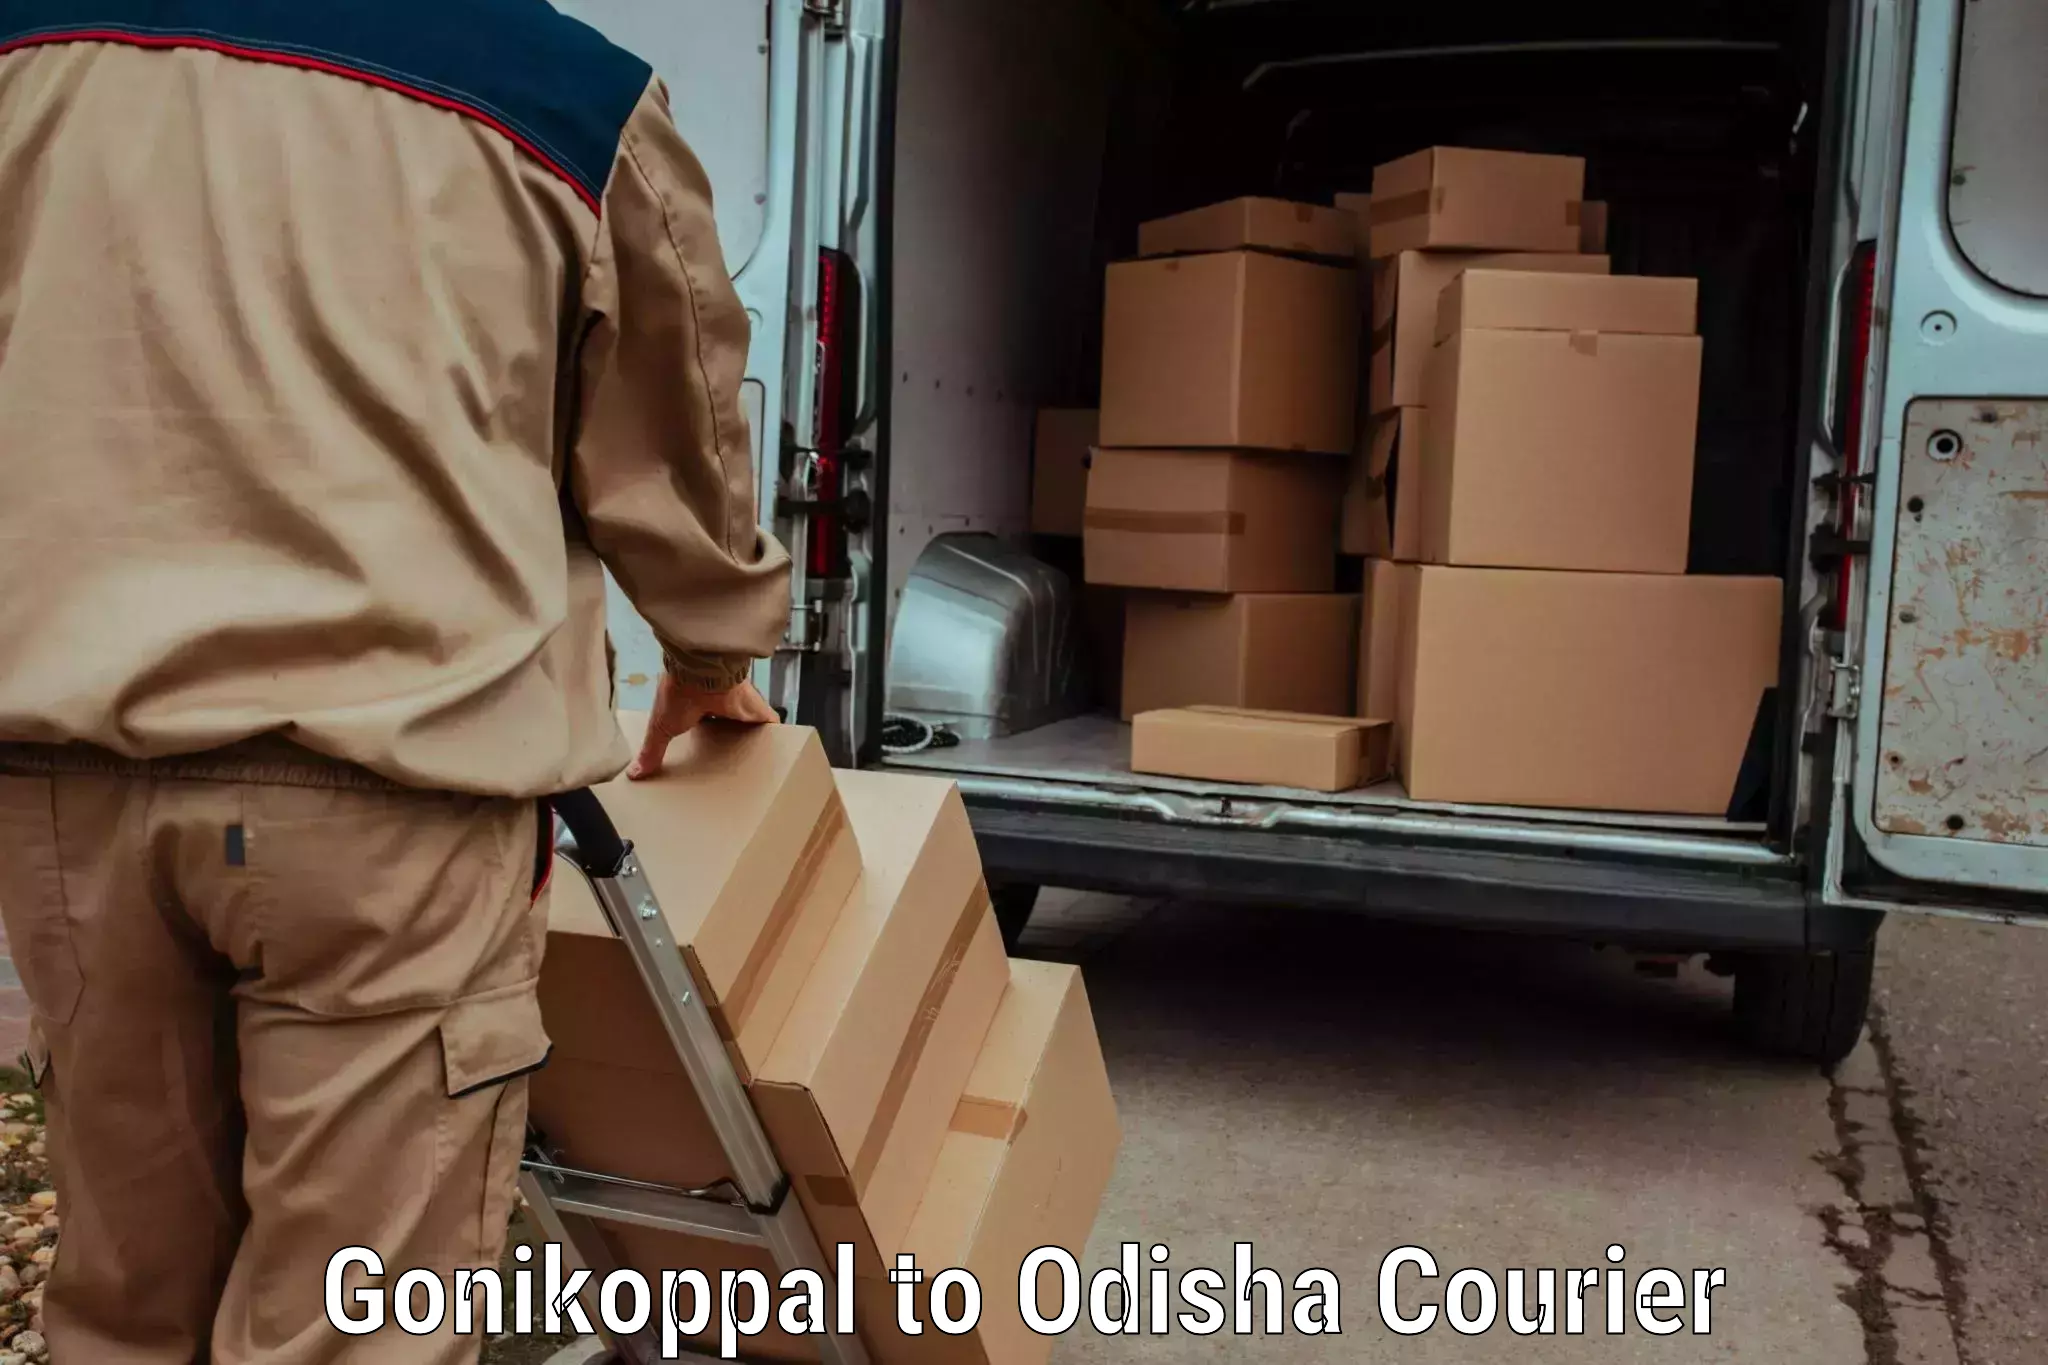 High-priority parcel service Gonikoppal to Kendrapara